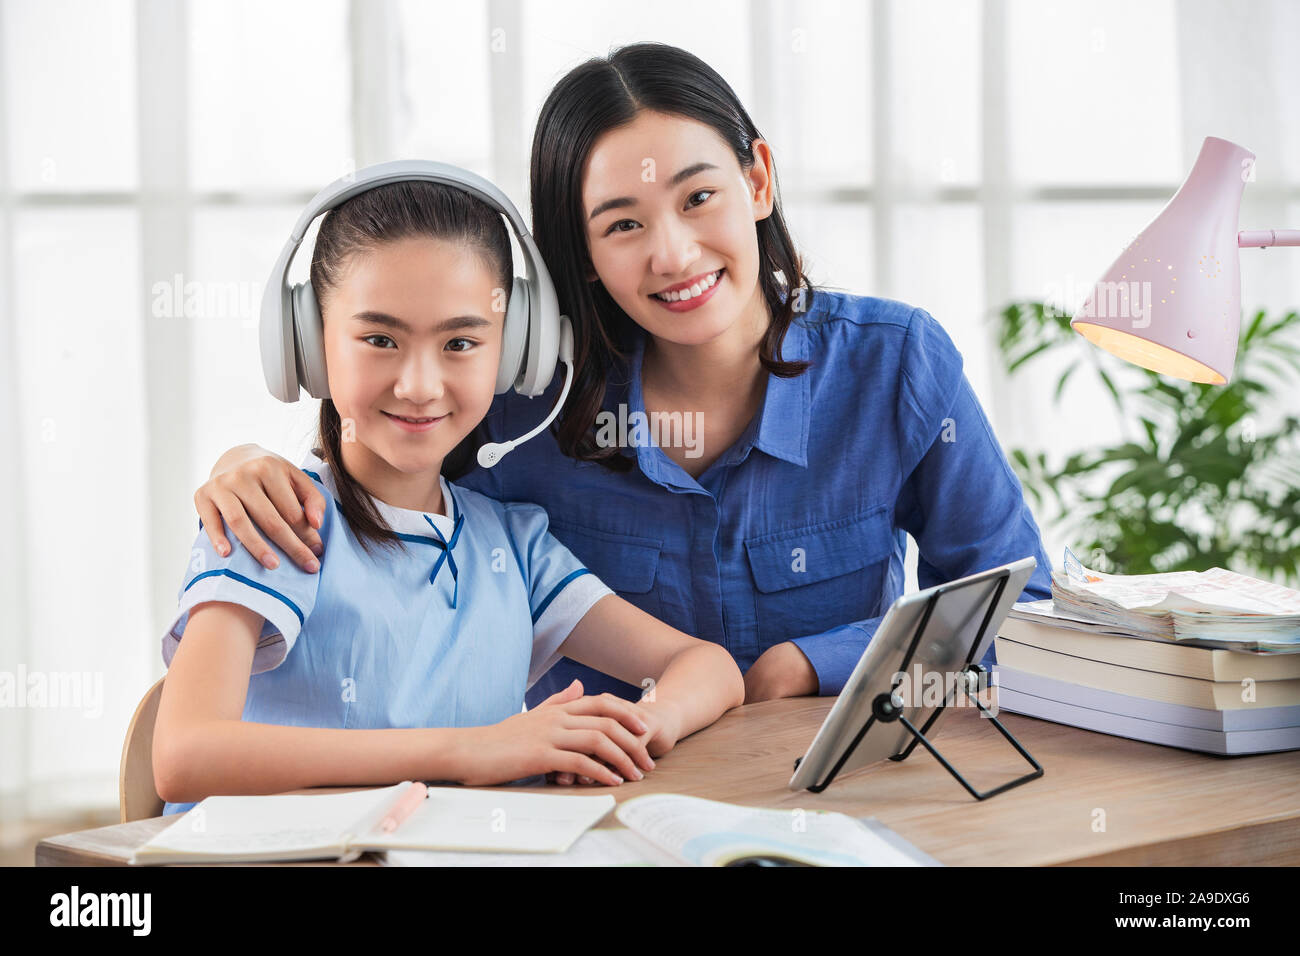 The teacher and students one-on-one online education Stock Photo